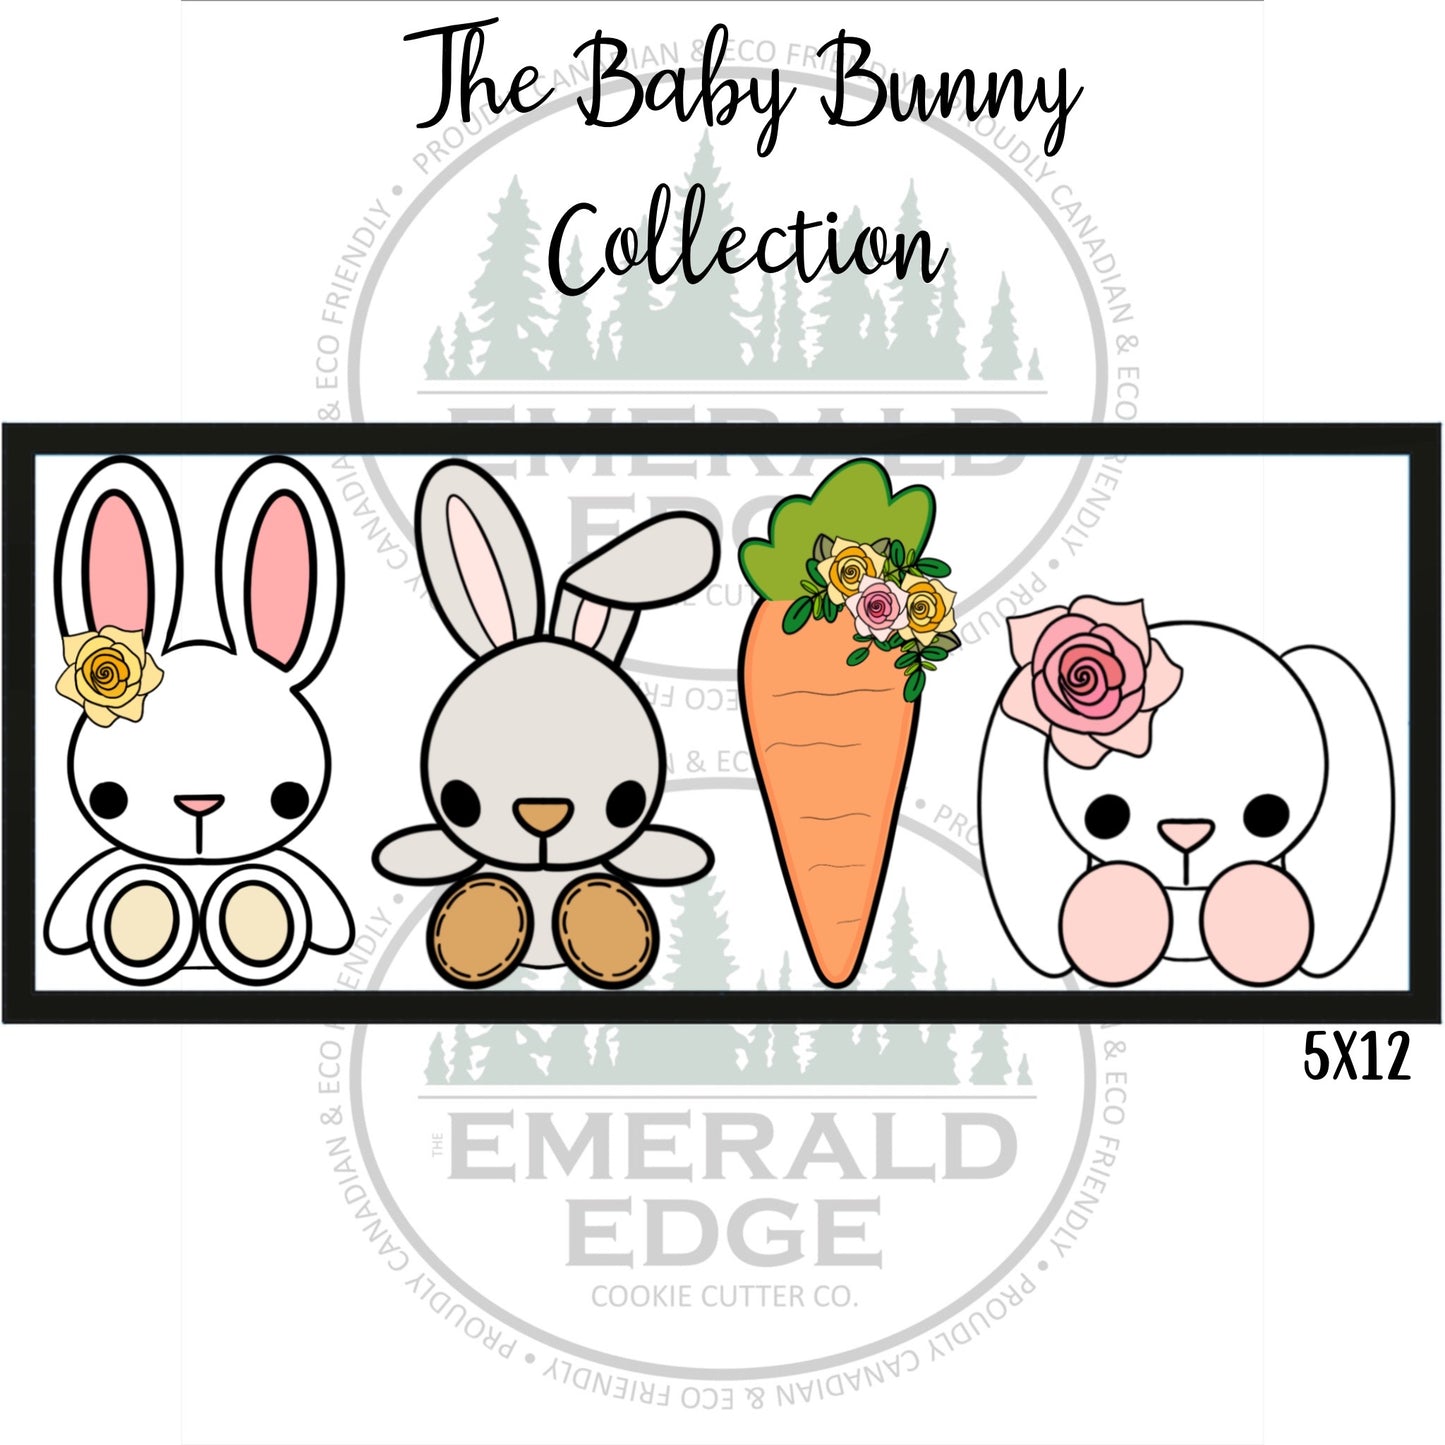 The Baby Bunny Collection